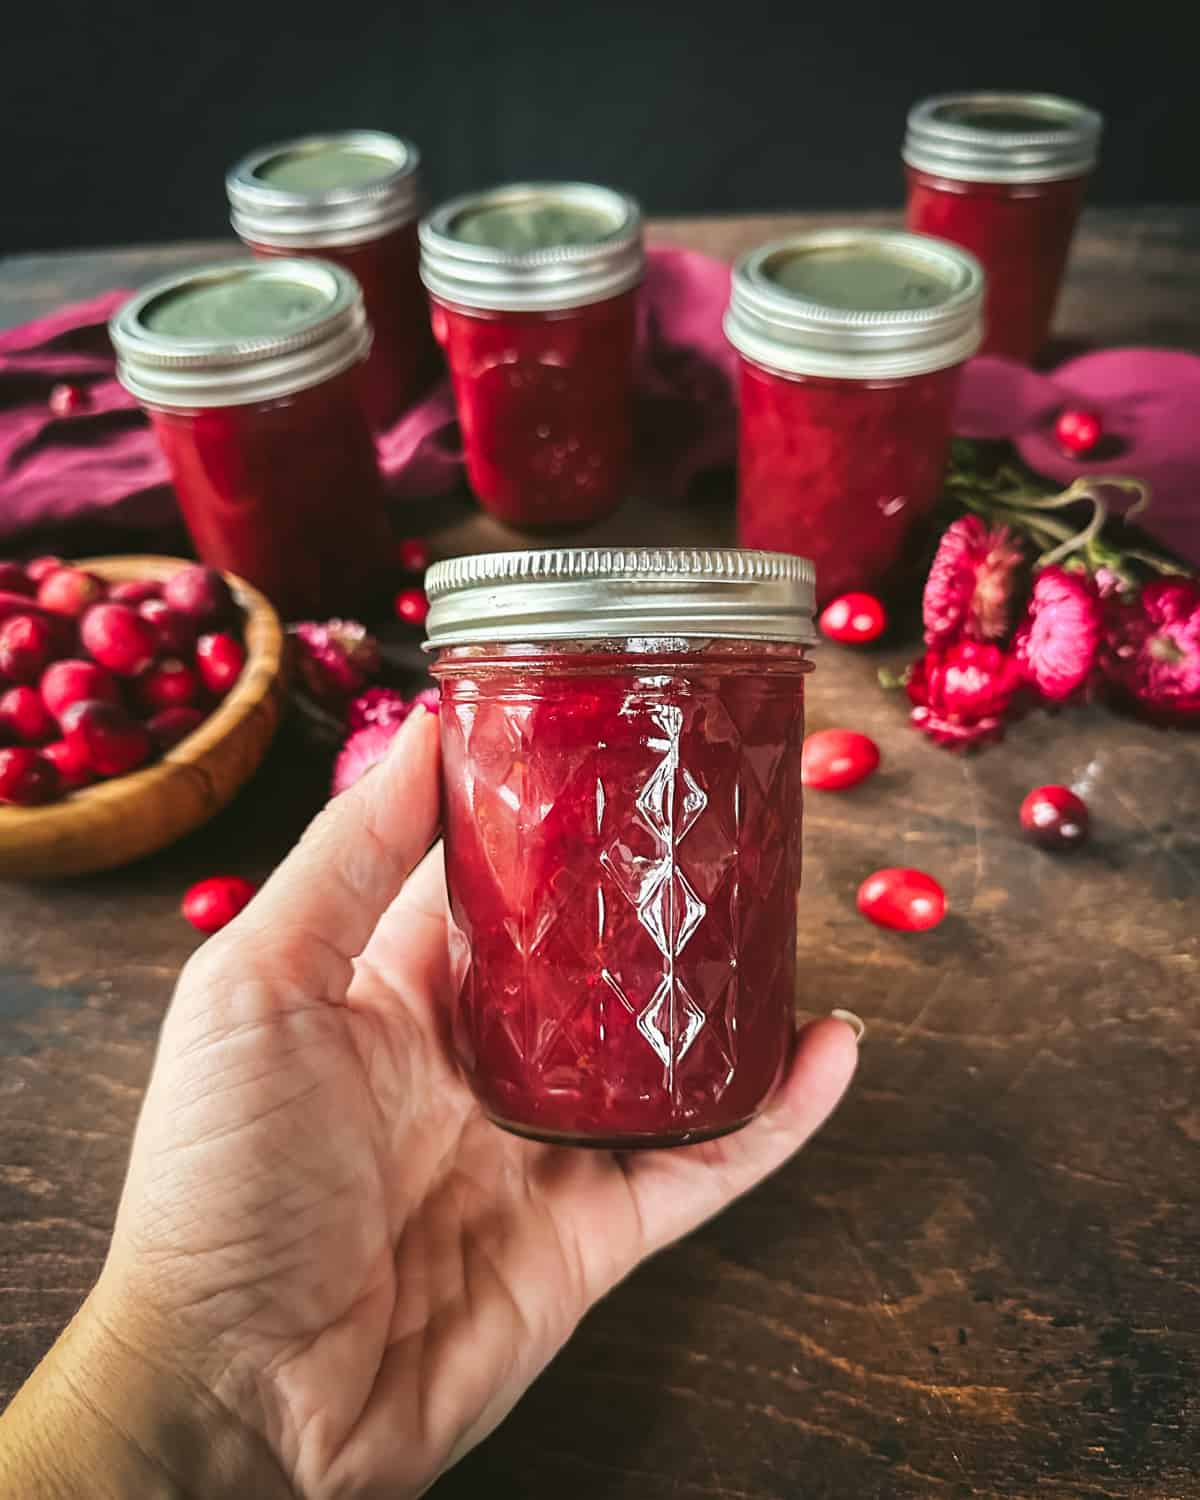 A jar of canned cranberry sauce being held by a hand, with other jars of cranberry sauce, fresh cranberries, and a burgundy cloth in the background.